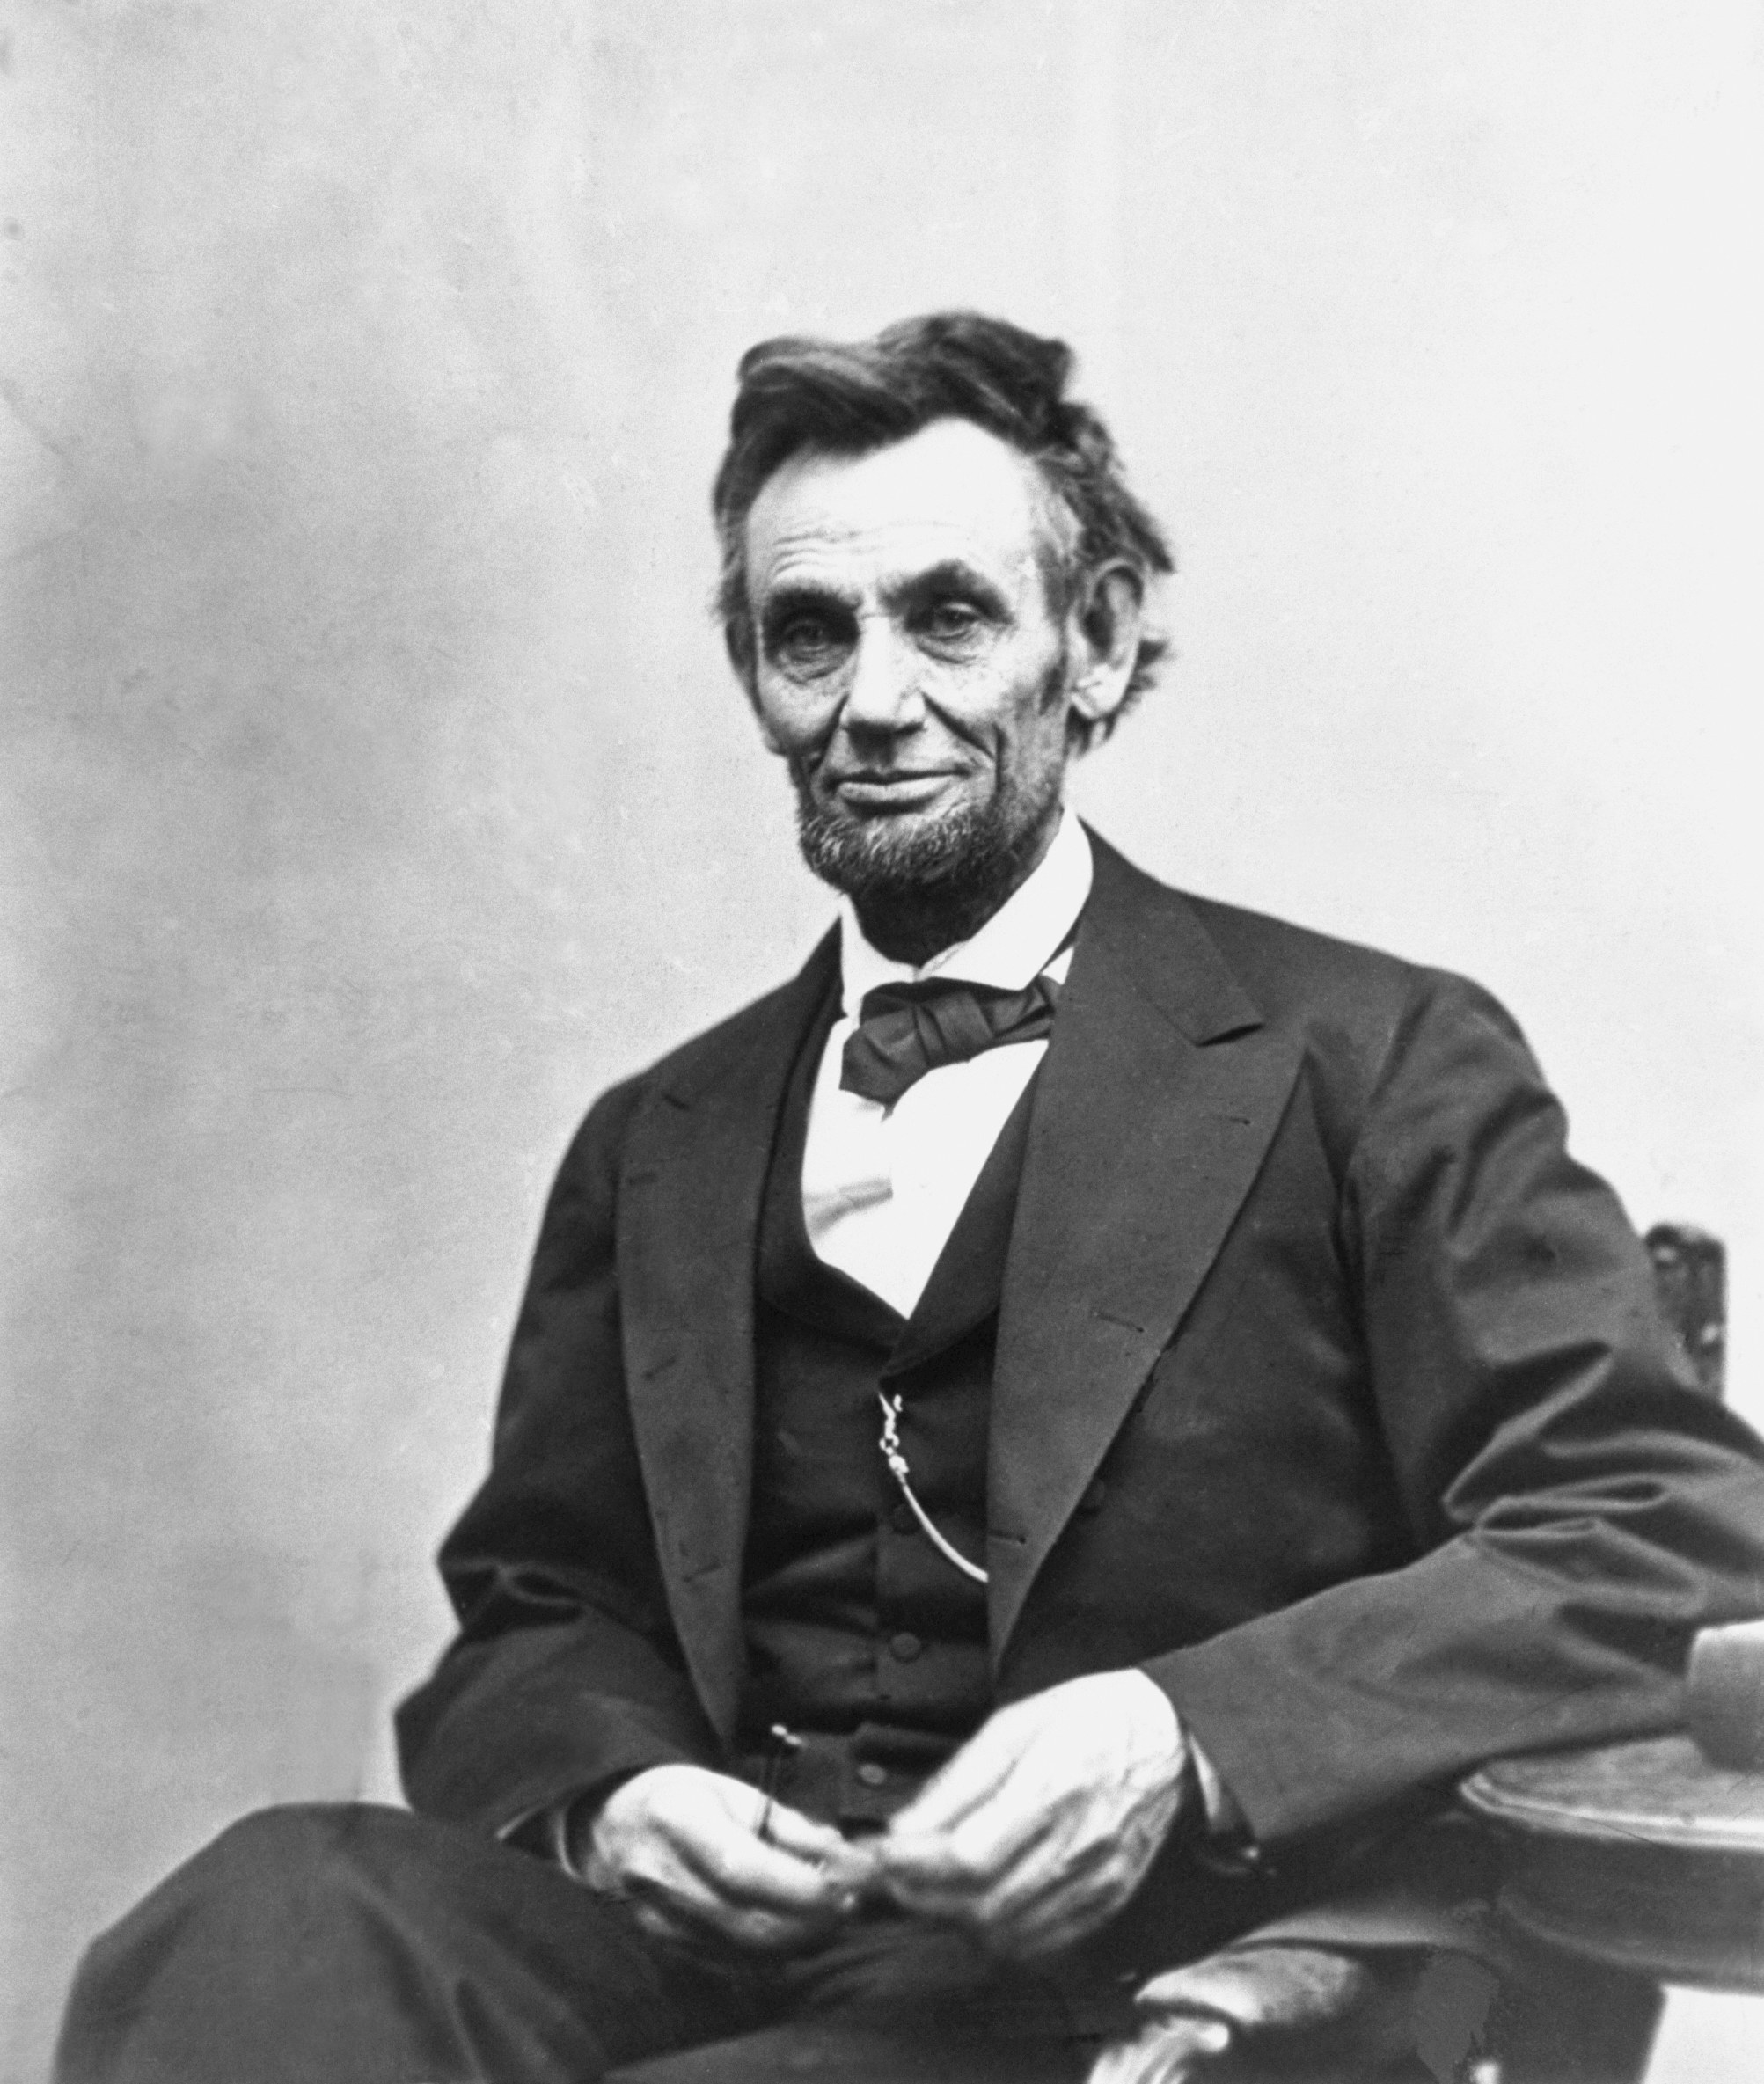 Abe Lincoln sitting in a chair